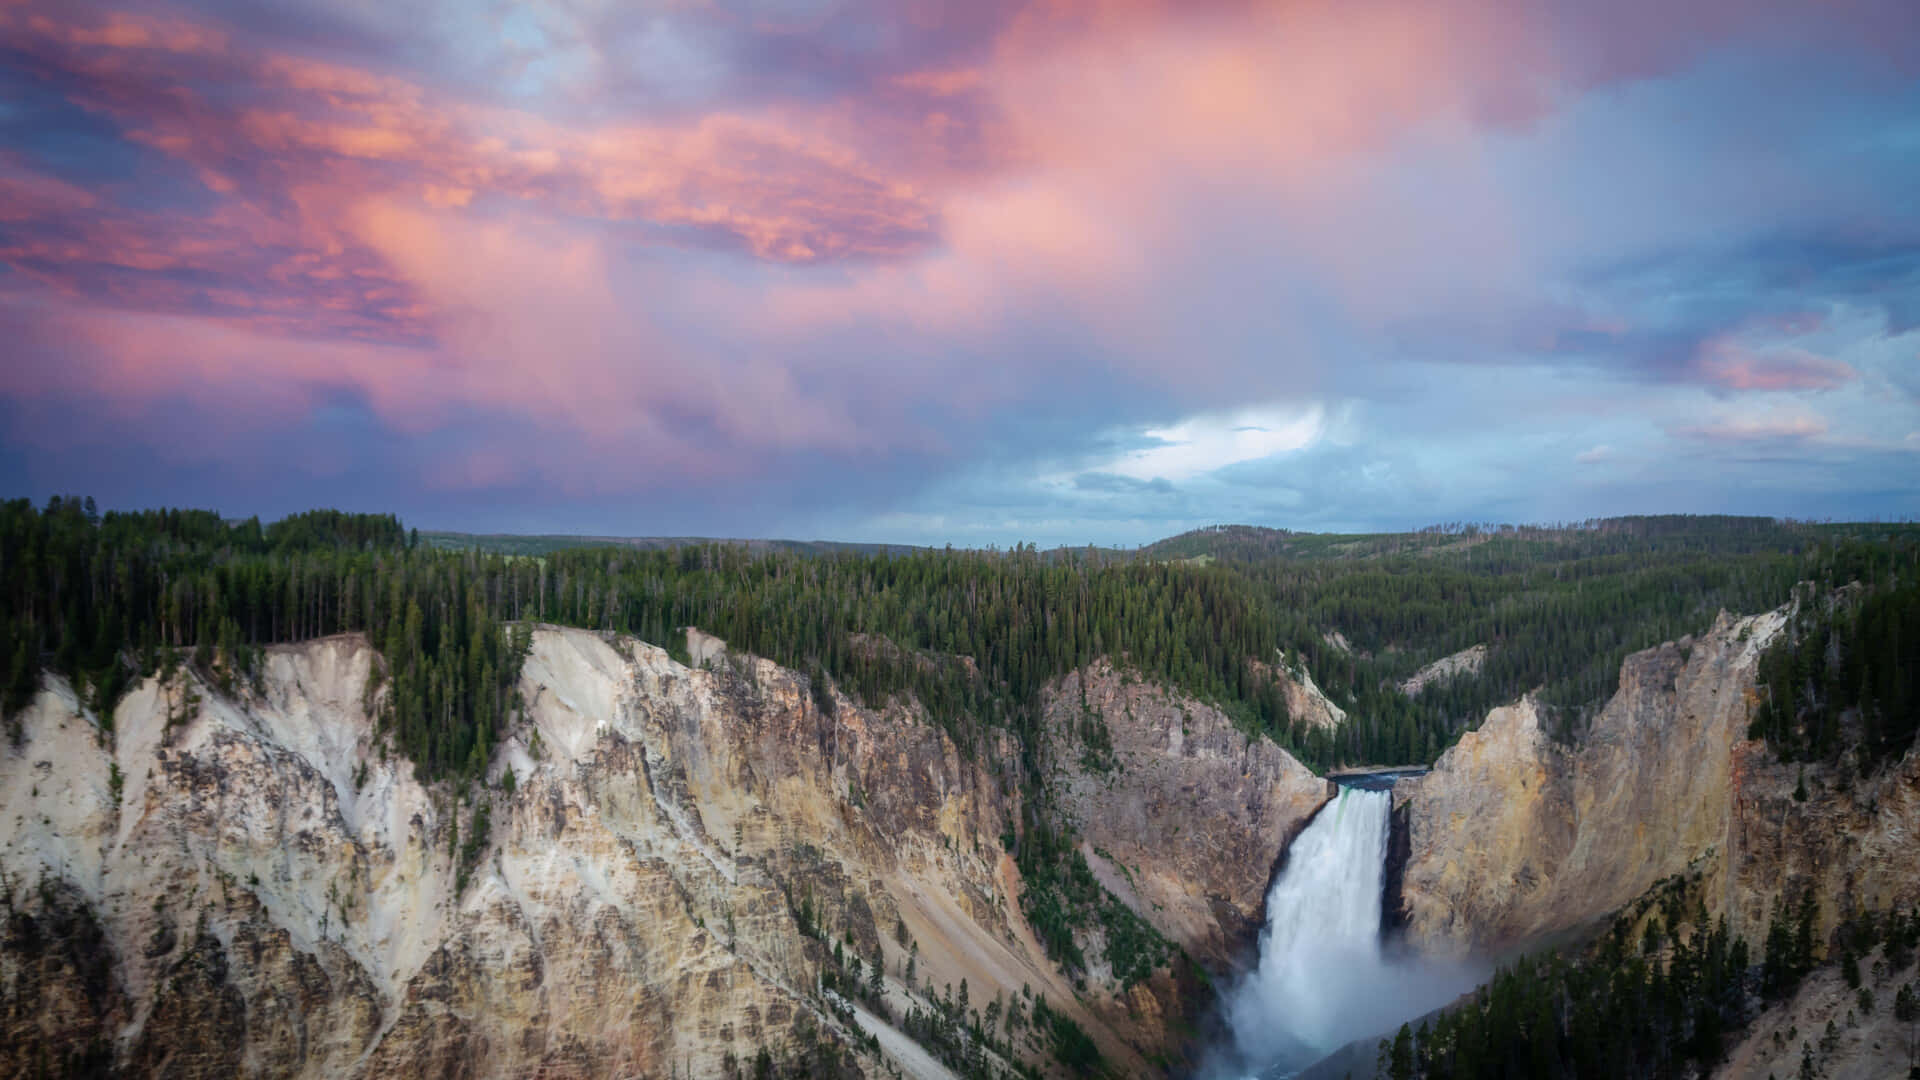 Majestic Lone Tree Against the Majestic Yellowstone Wallpaper